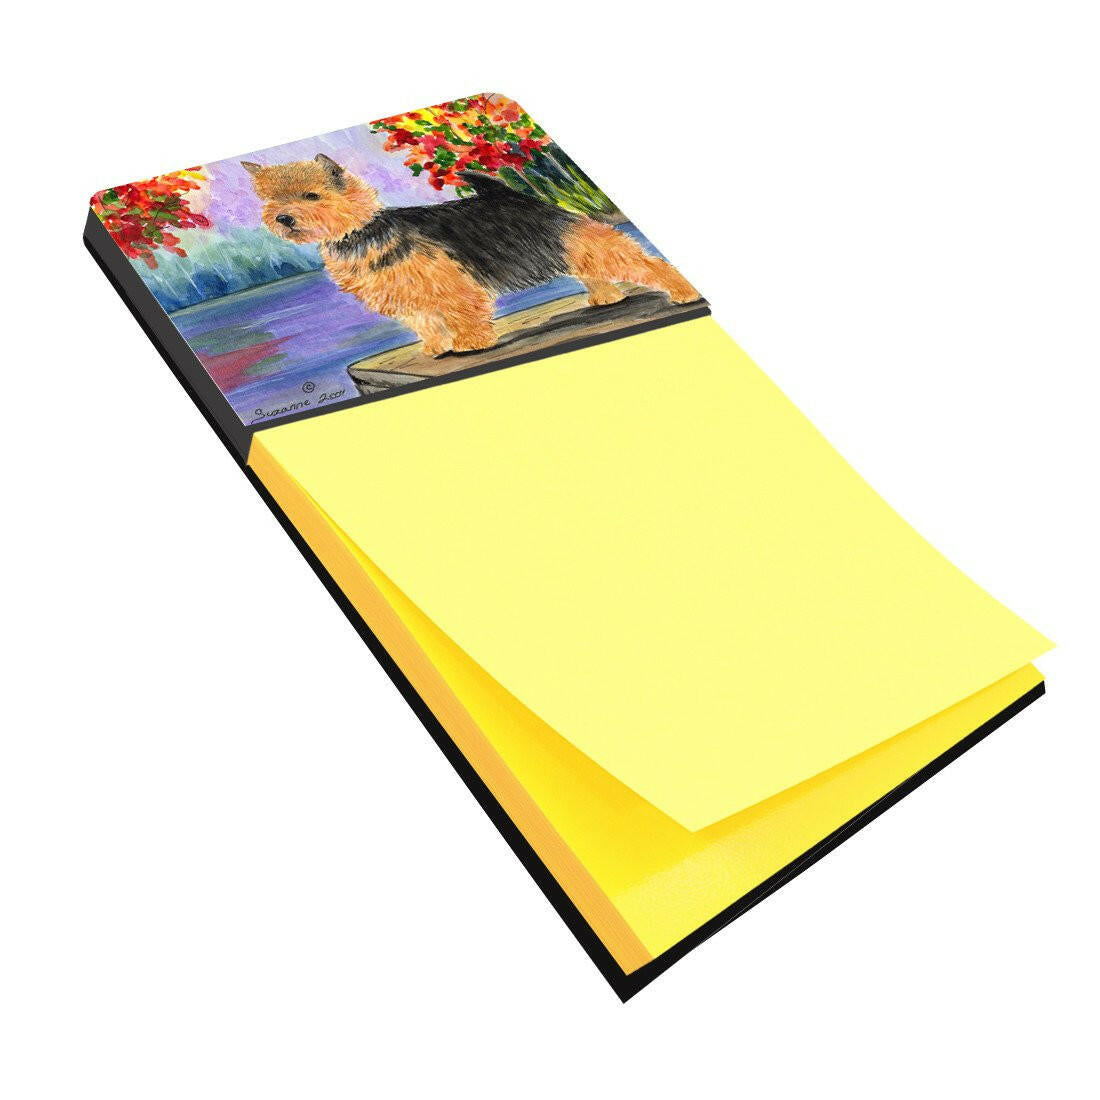 Norwich Terrier Refiillable Sticky Note Holder or Postit Note Dispenser SS8054SN by Caroline's Treasures